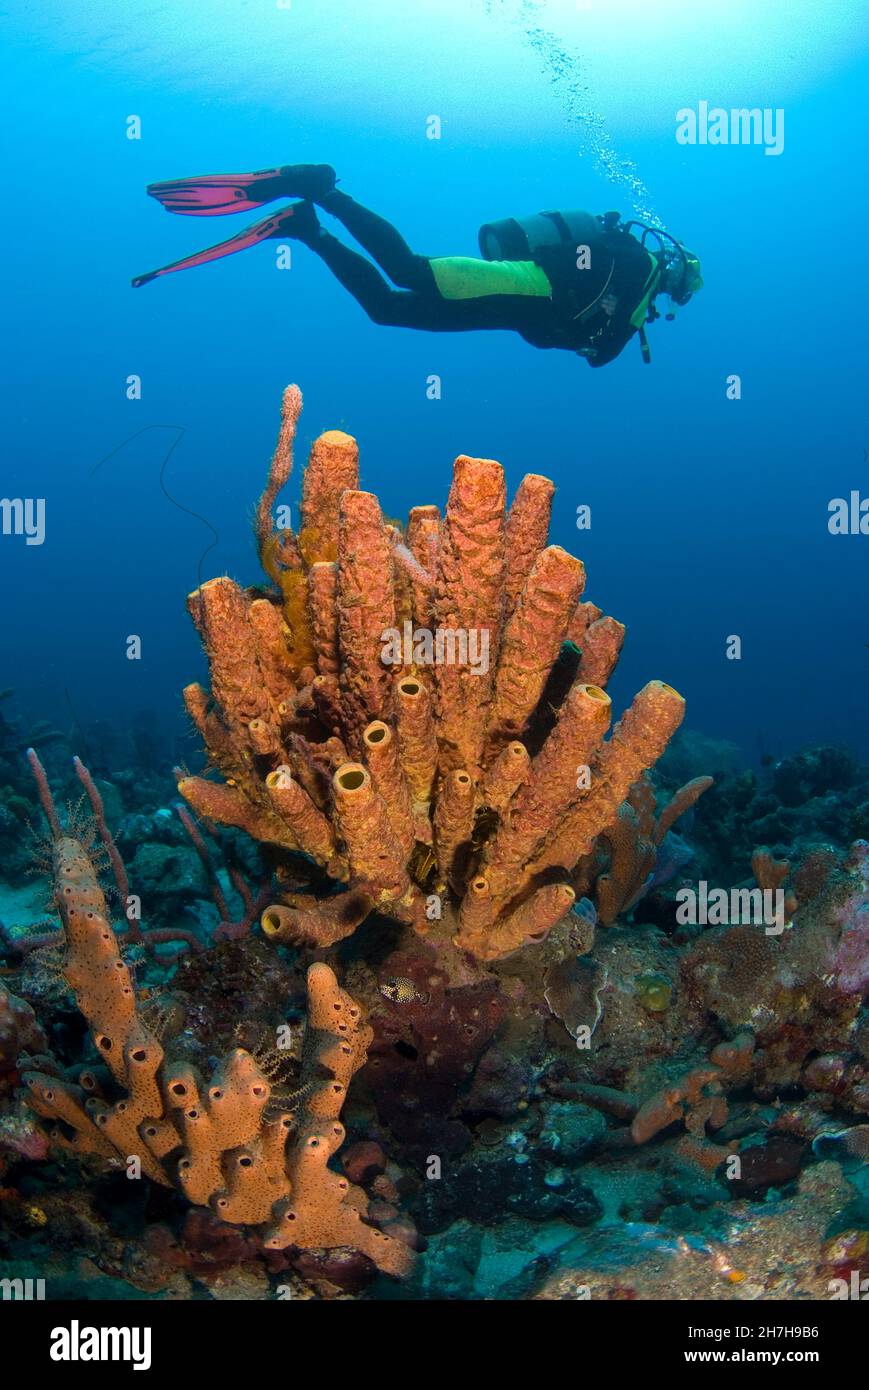 FRENCH WEST INDIES. MARTINIQUE ISLAND. DEEP SEA. TUBULARS SPONGES Stock Photo